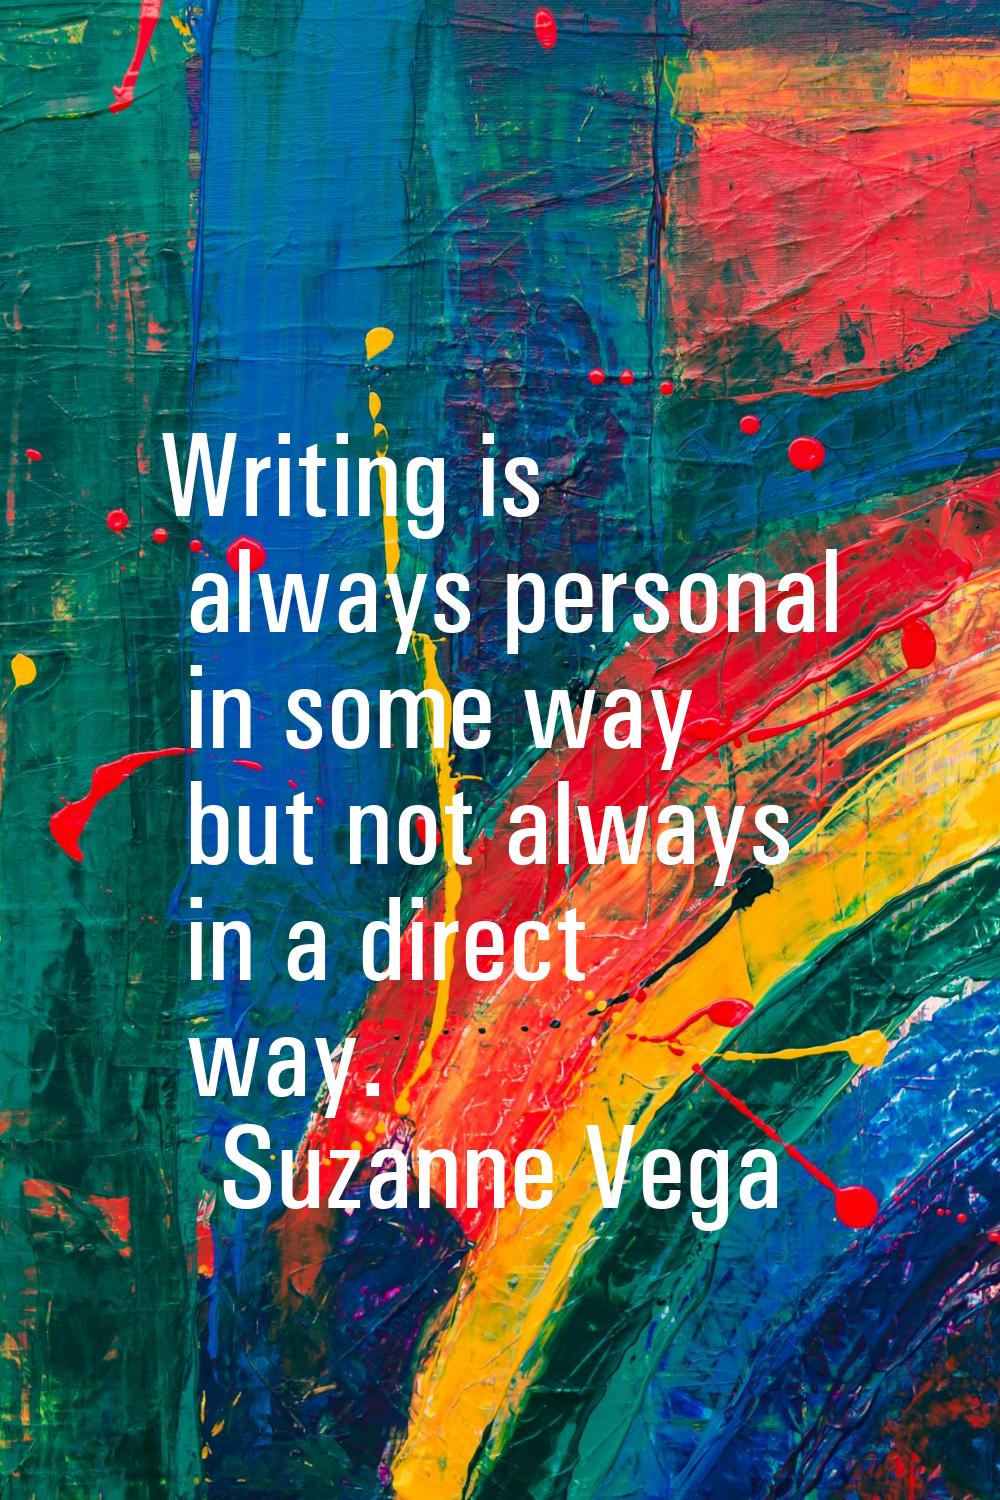 Writing is always personal in some way but not always in a direct way.